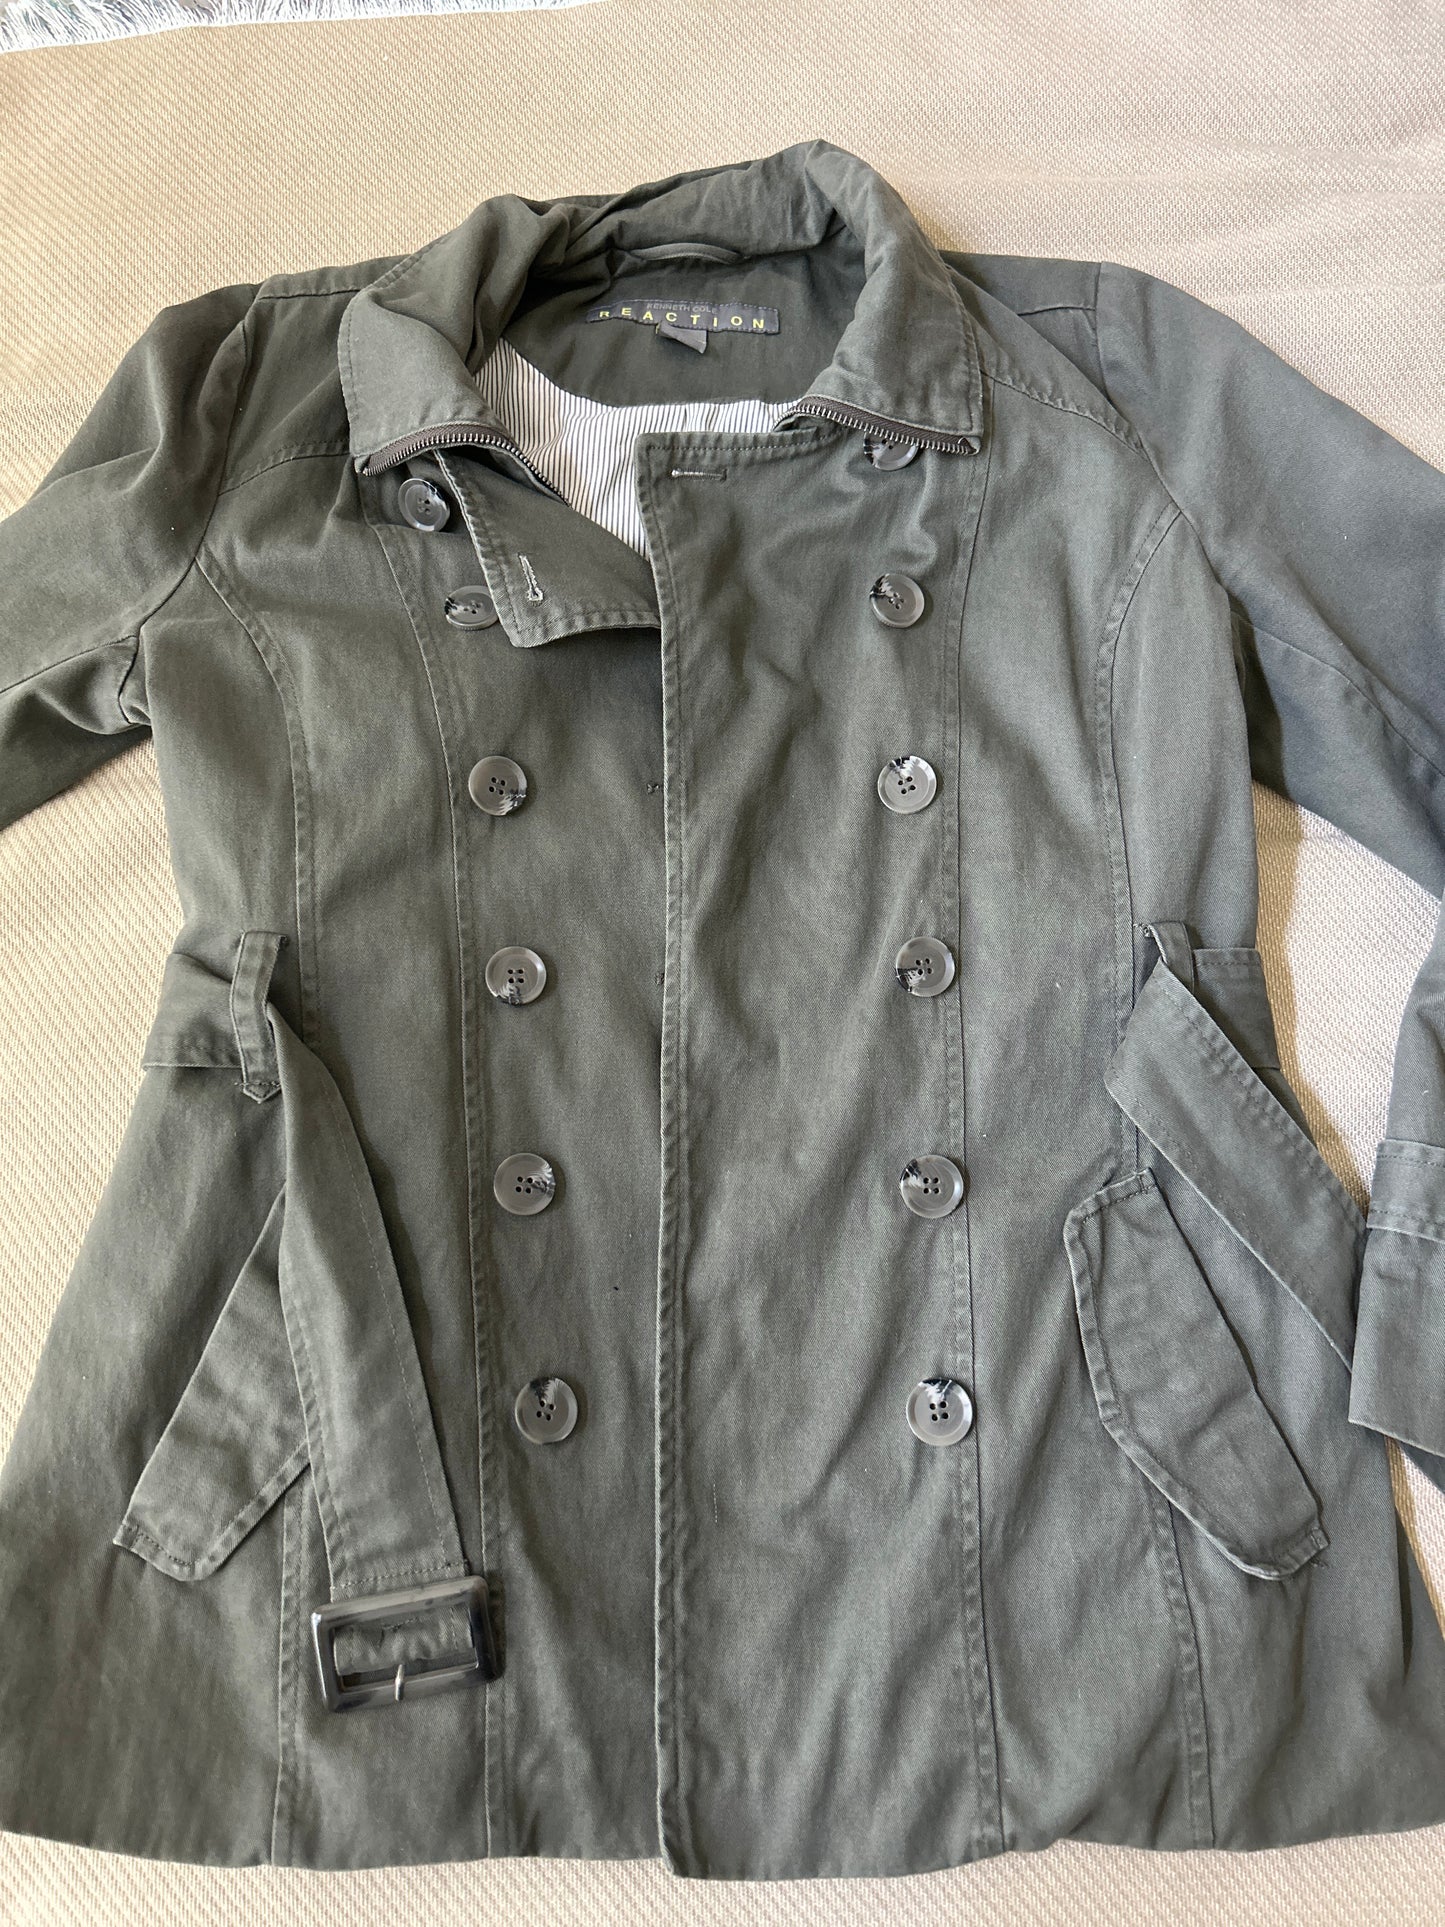 Kenneth Cole Reaction/Women's Belted Double-Breasted Jacket/Olive Green/Size M